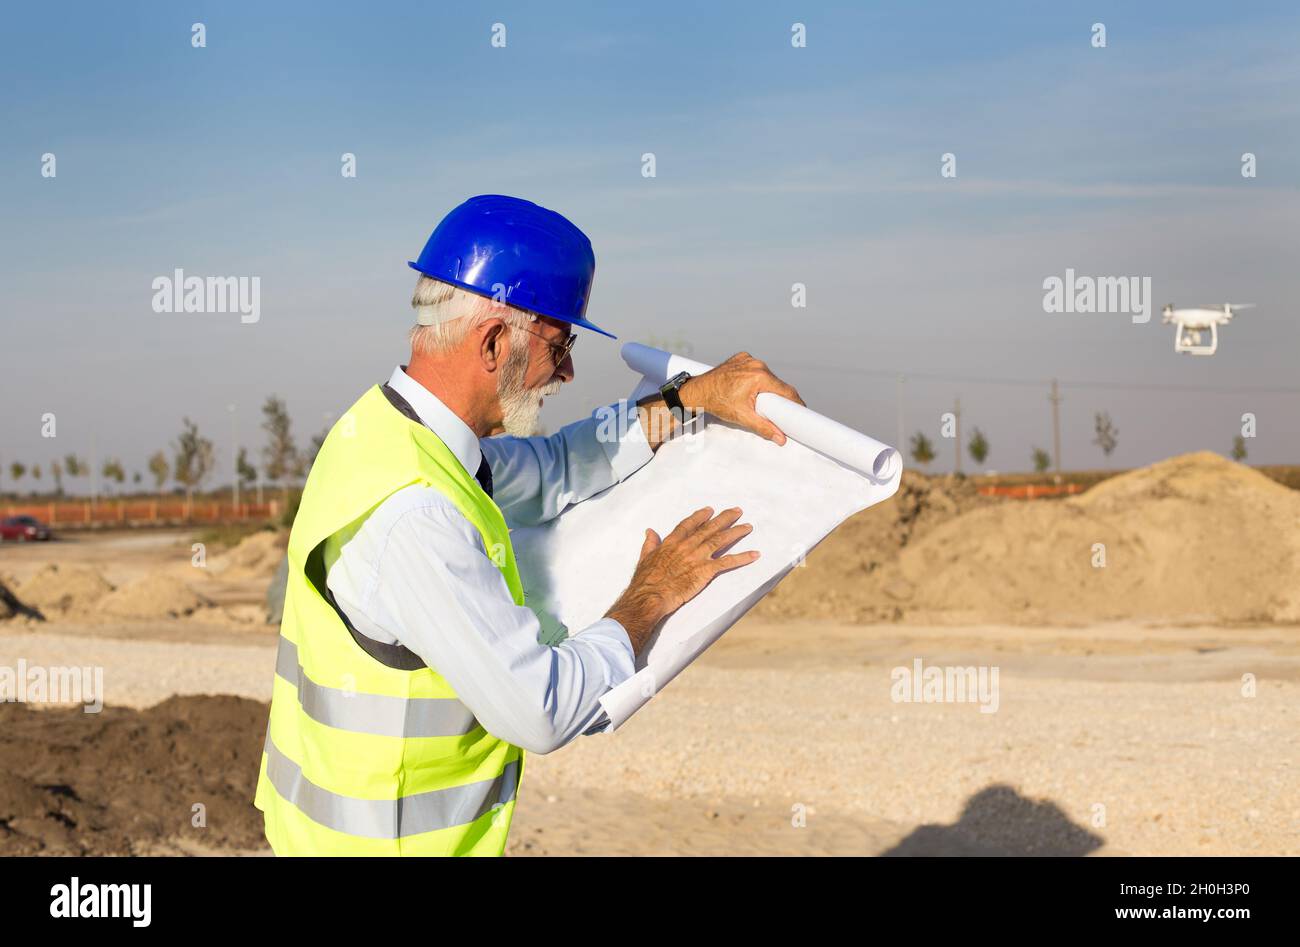 Senior engineer looking at blueprints in front of metal construction at building site Stock Photo